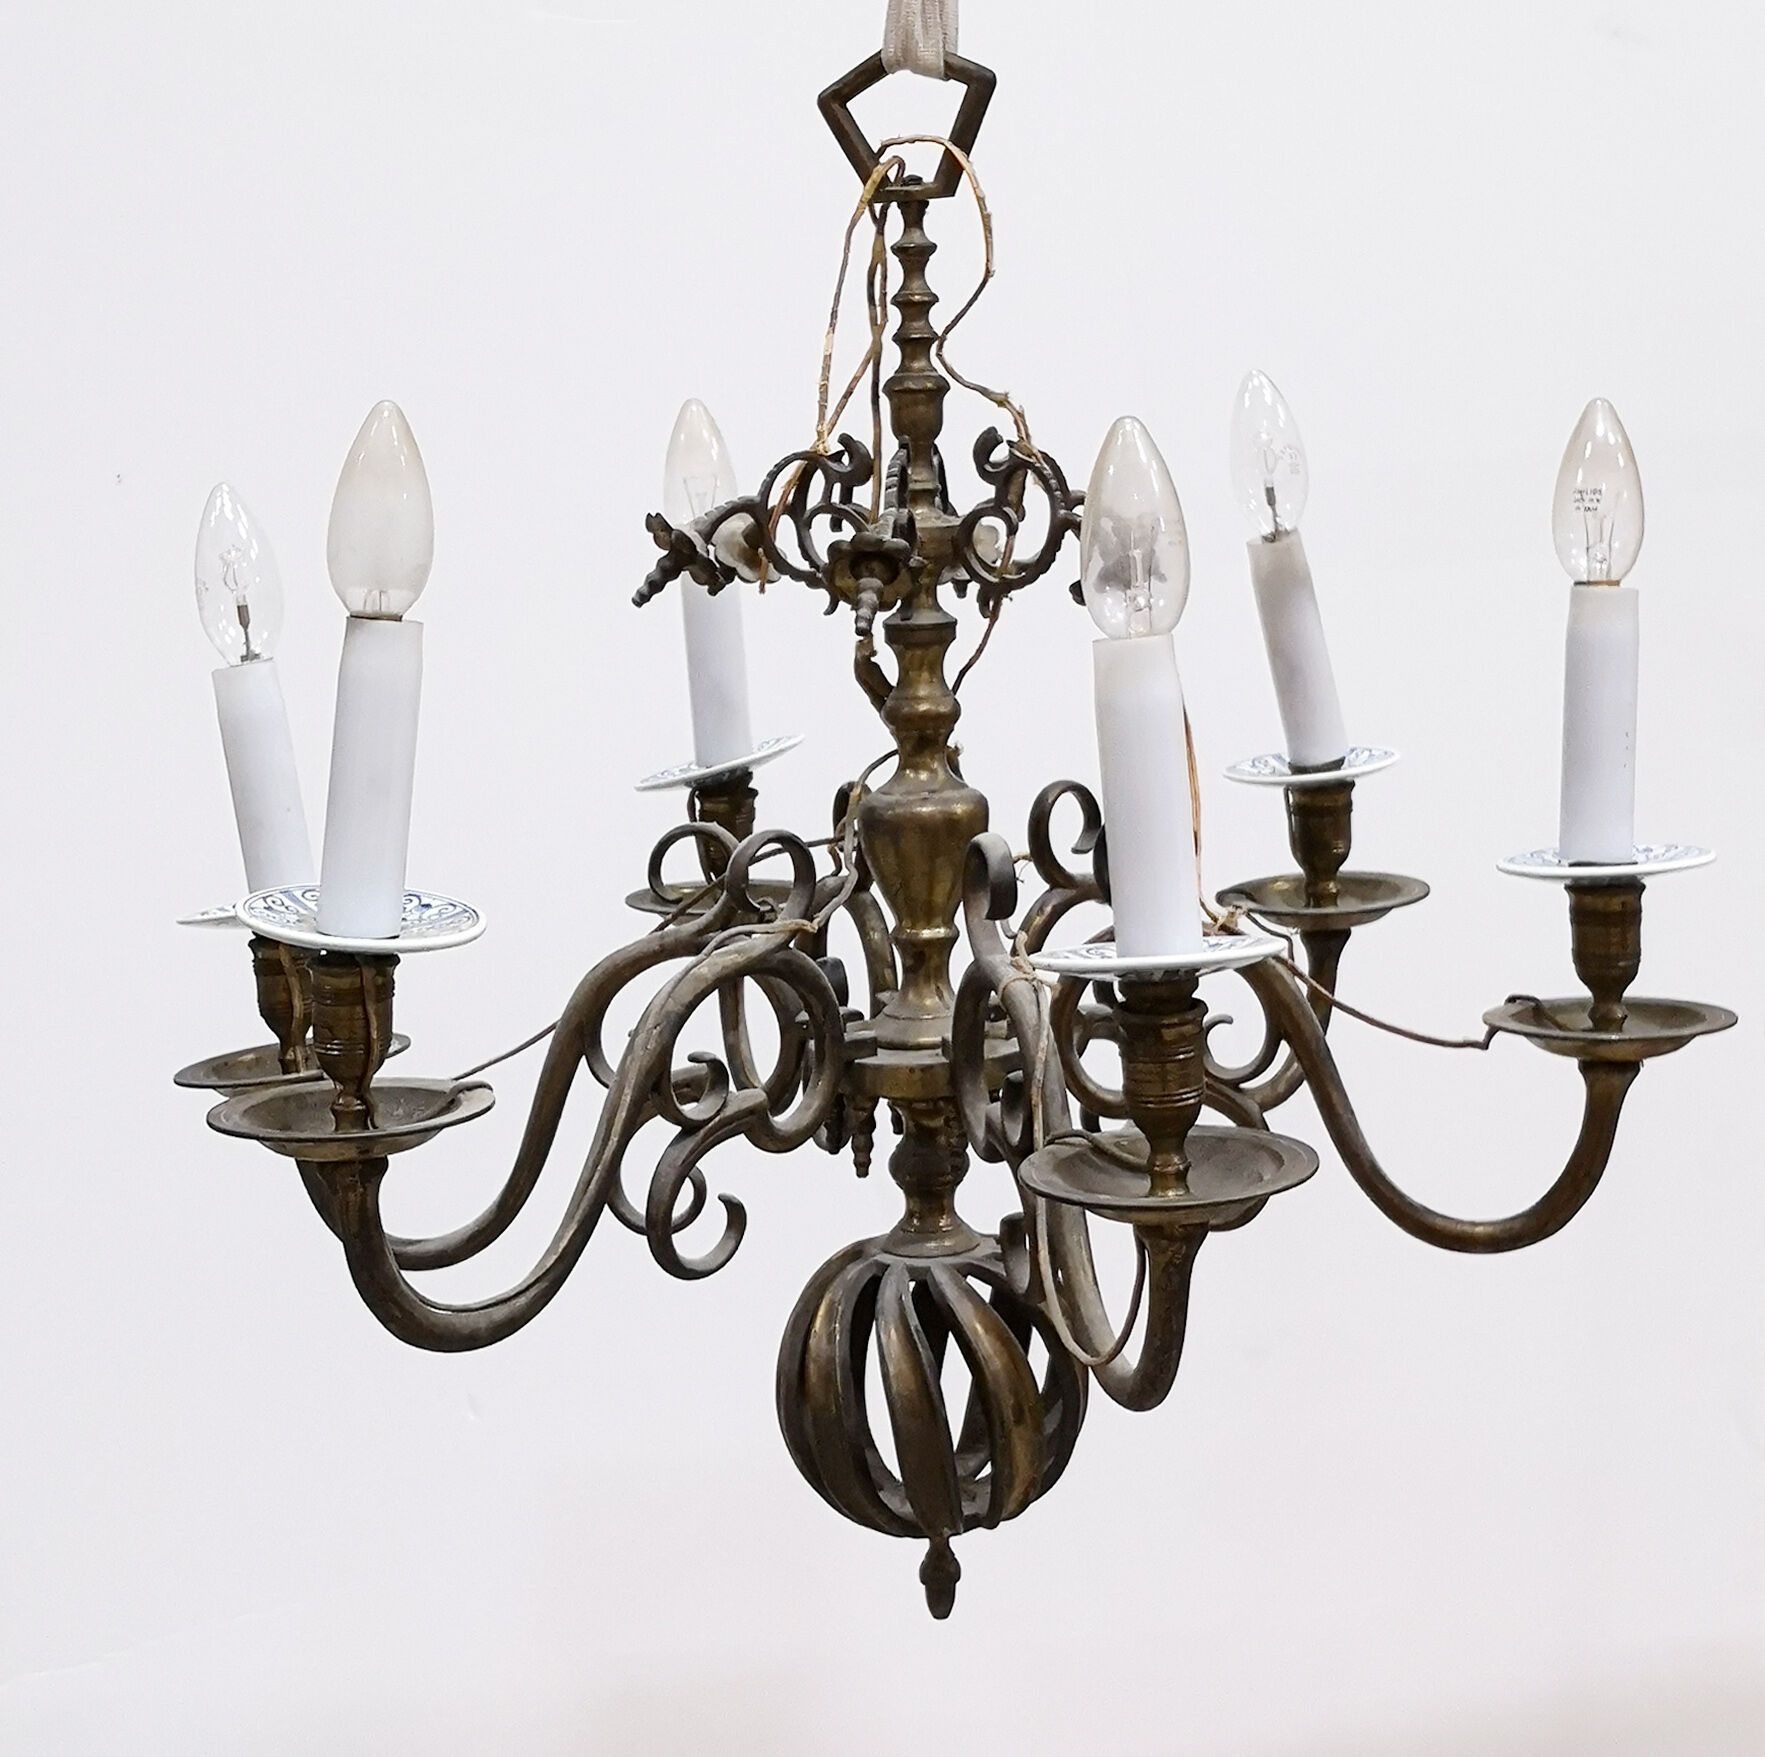 HOLLANDE, XIXème siècle Brass chandelier with six arms of light and openwork bal&hellip;